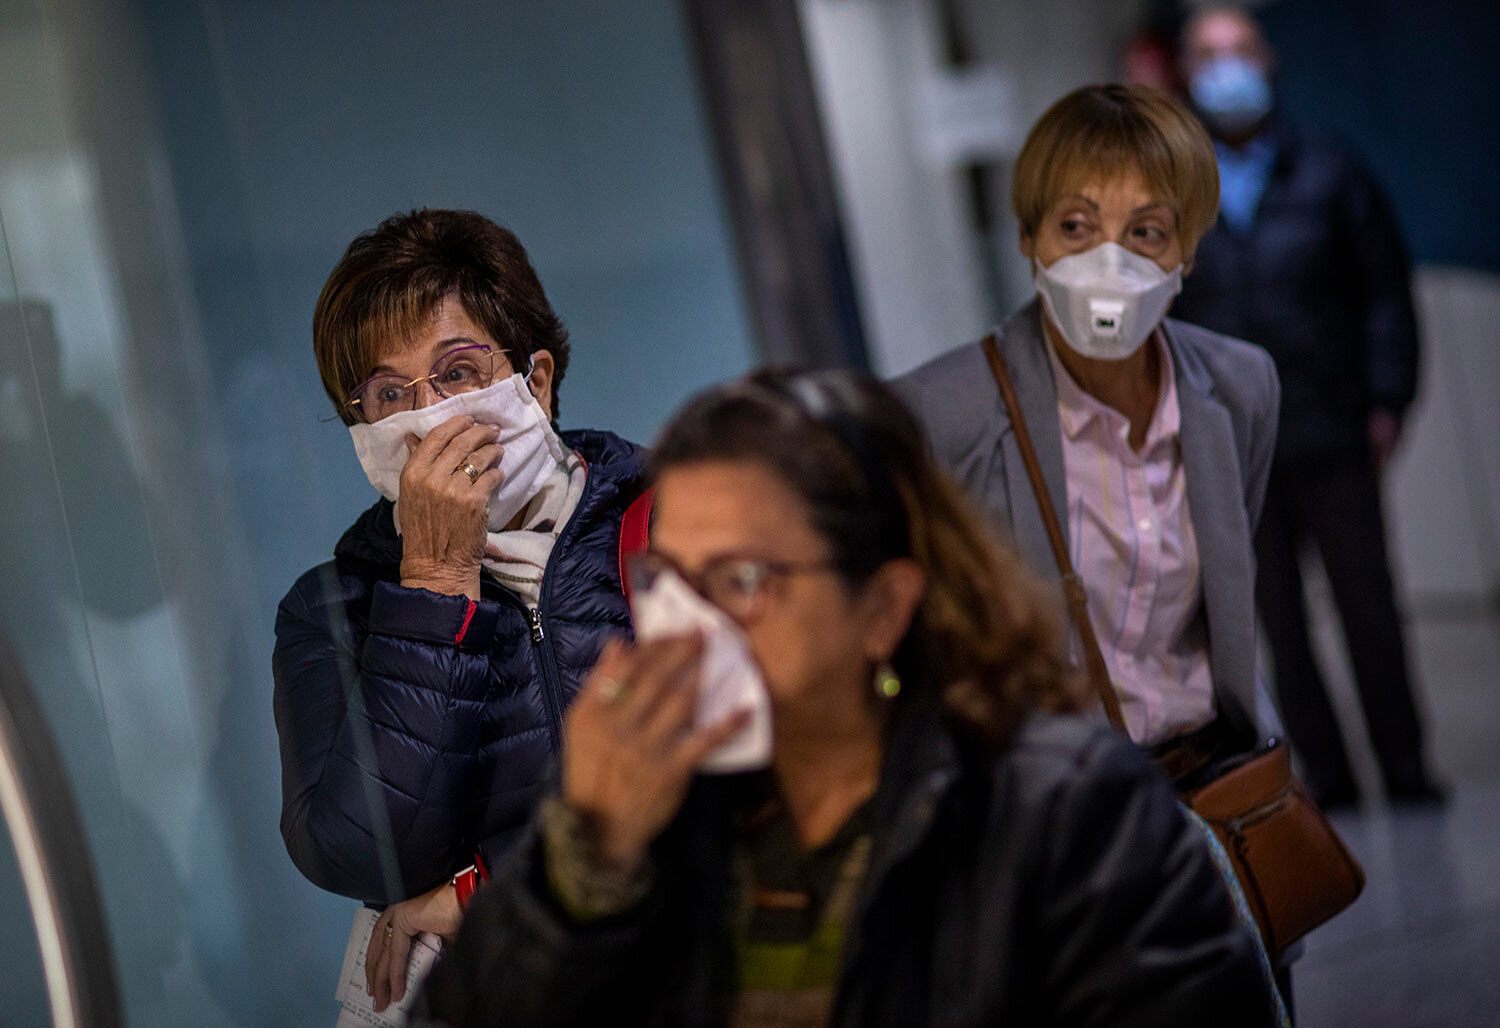  People wait their turn for a blood sample in a hallway of a hospital in Barcelona, Spain, March 18, 2020. Spain will mobilize 200 billion euros or the equivalent to one fifth of the country's annual output in loans, credit guarantees and subsidies f